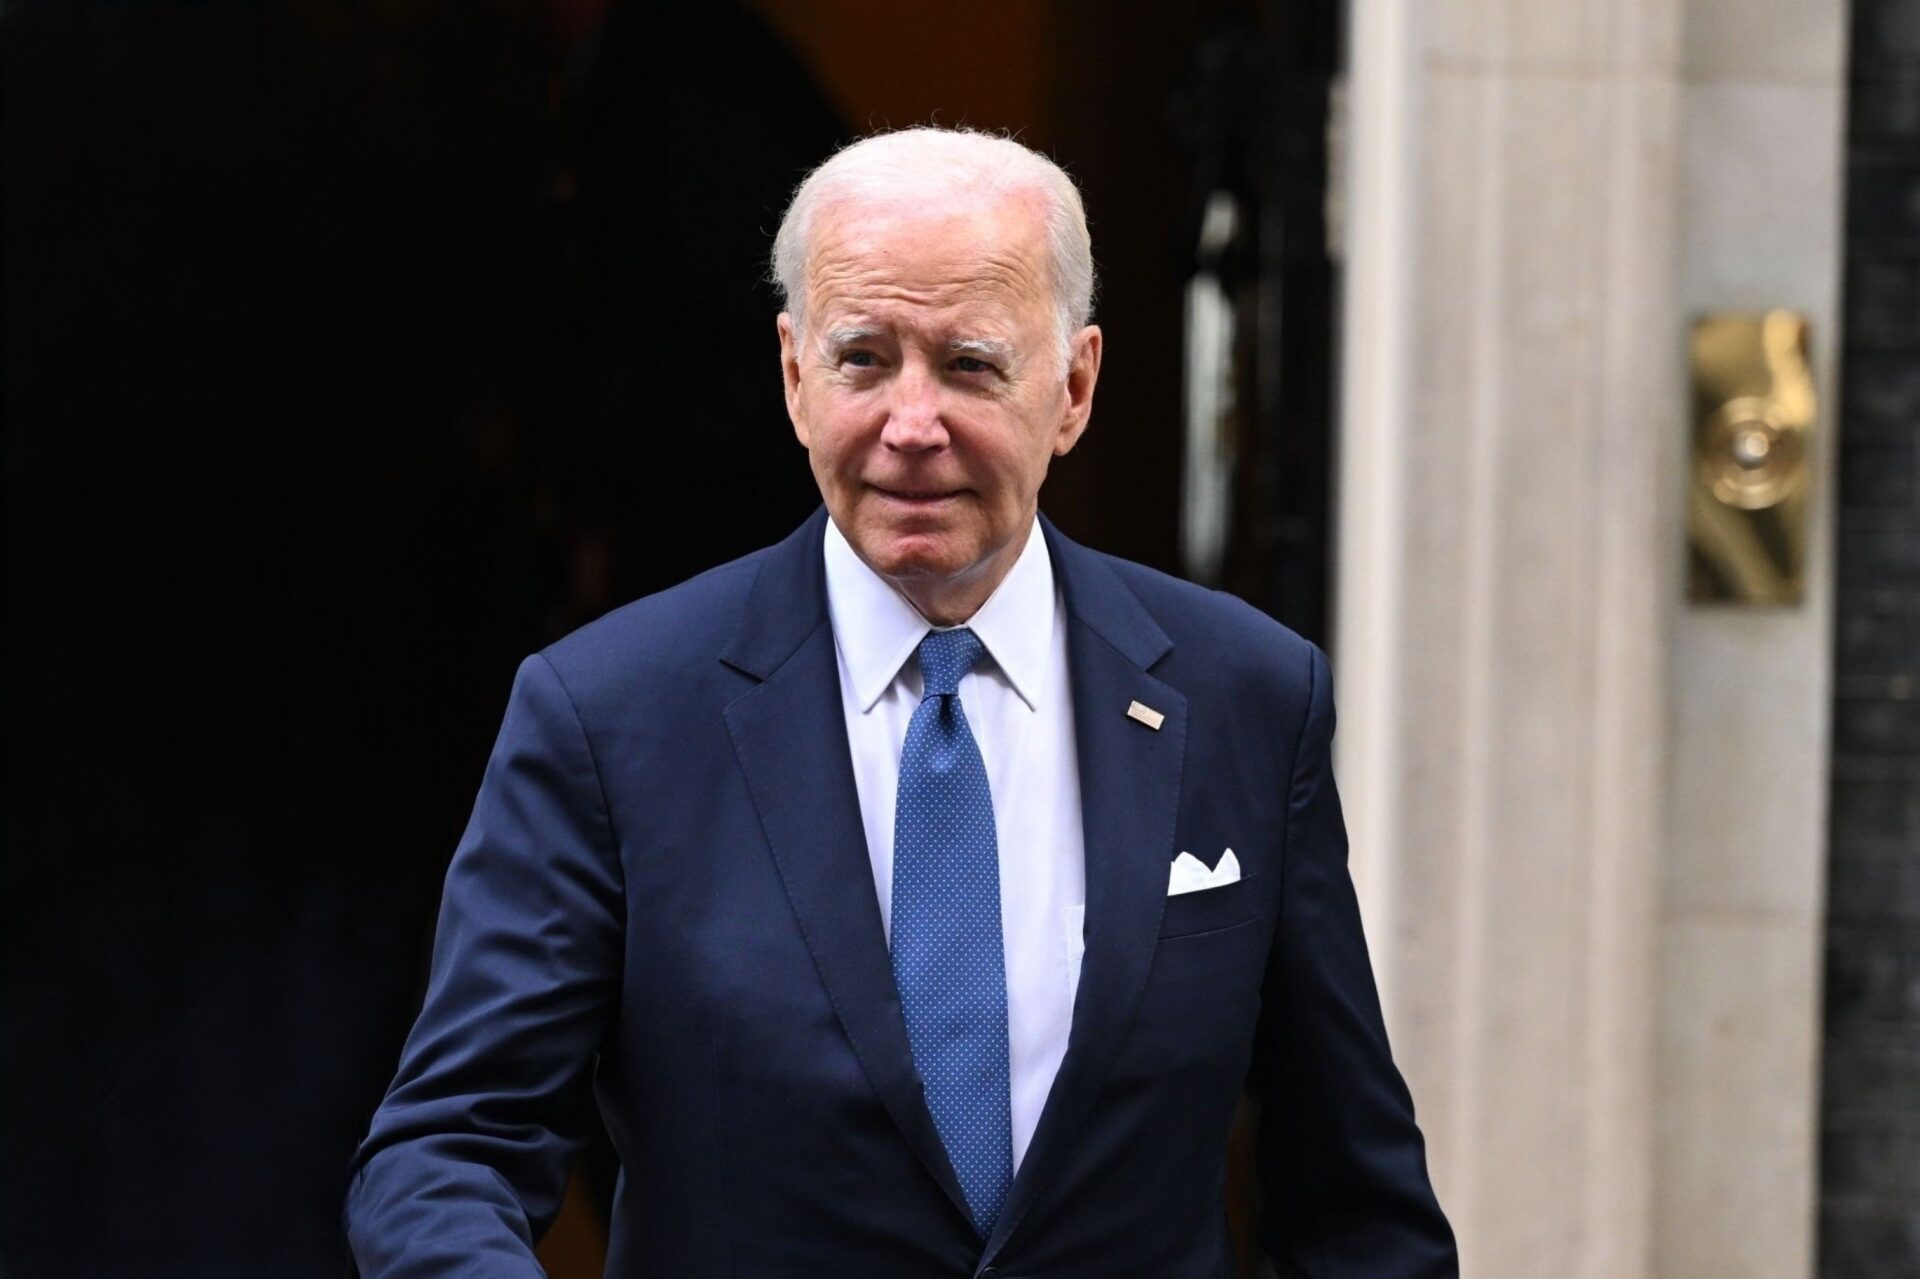 White House Claims Biden Didn’t Apologize For Use Of “Illegal”